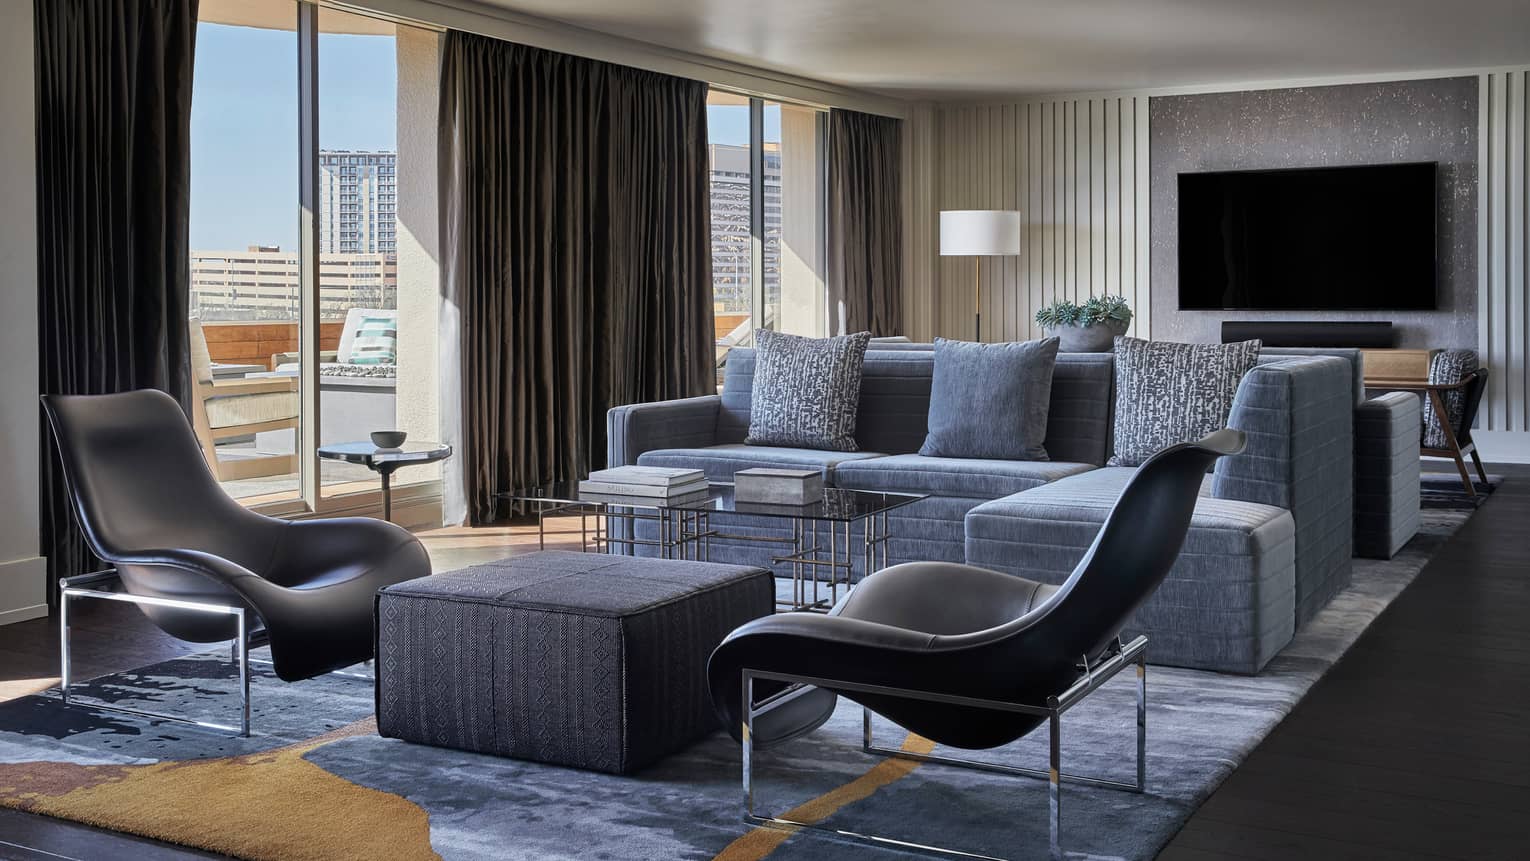 Congressional Suite modern sectional sofa, accent chairs, floor-to-ceiling windows, TV